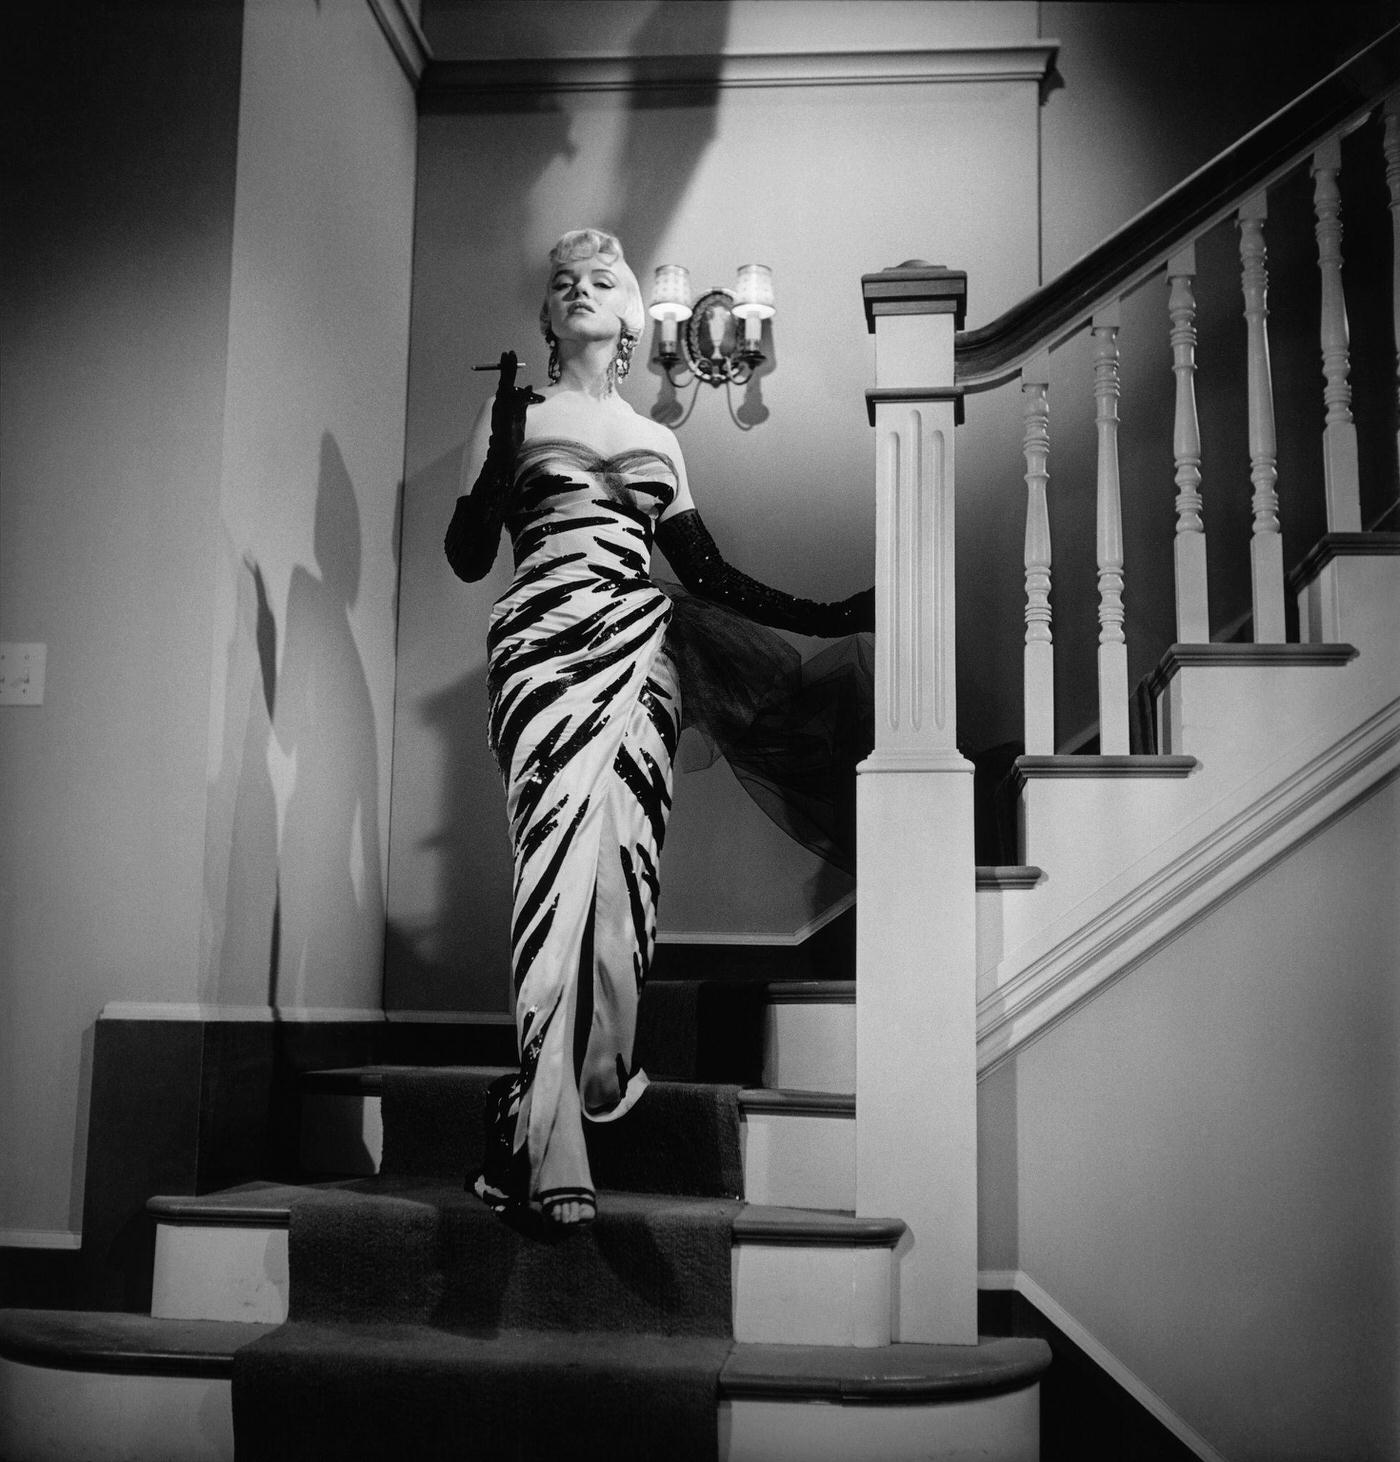 Marilyn Monroe ascends a staircase wearing a polka-dot dress in